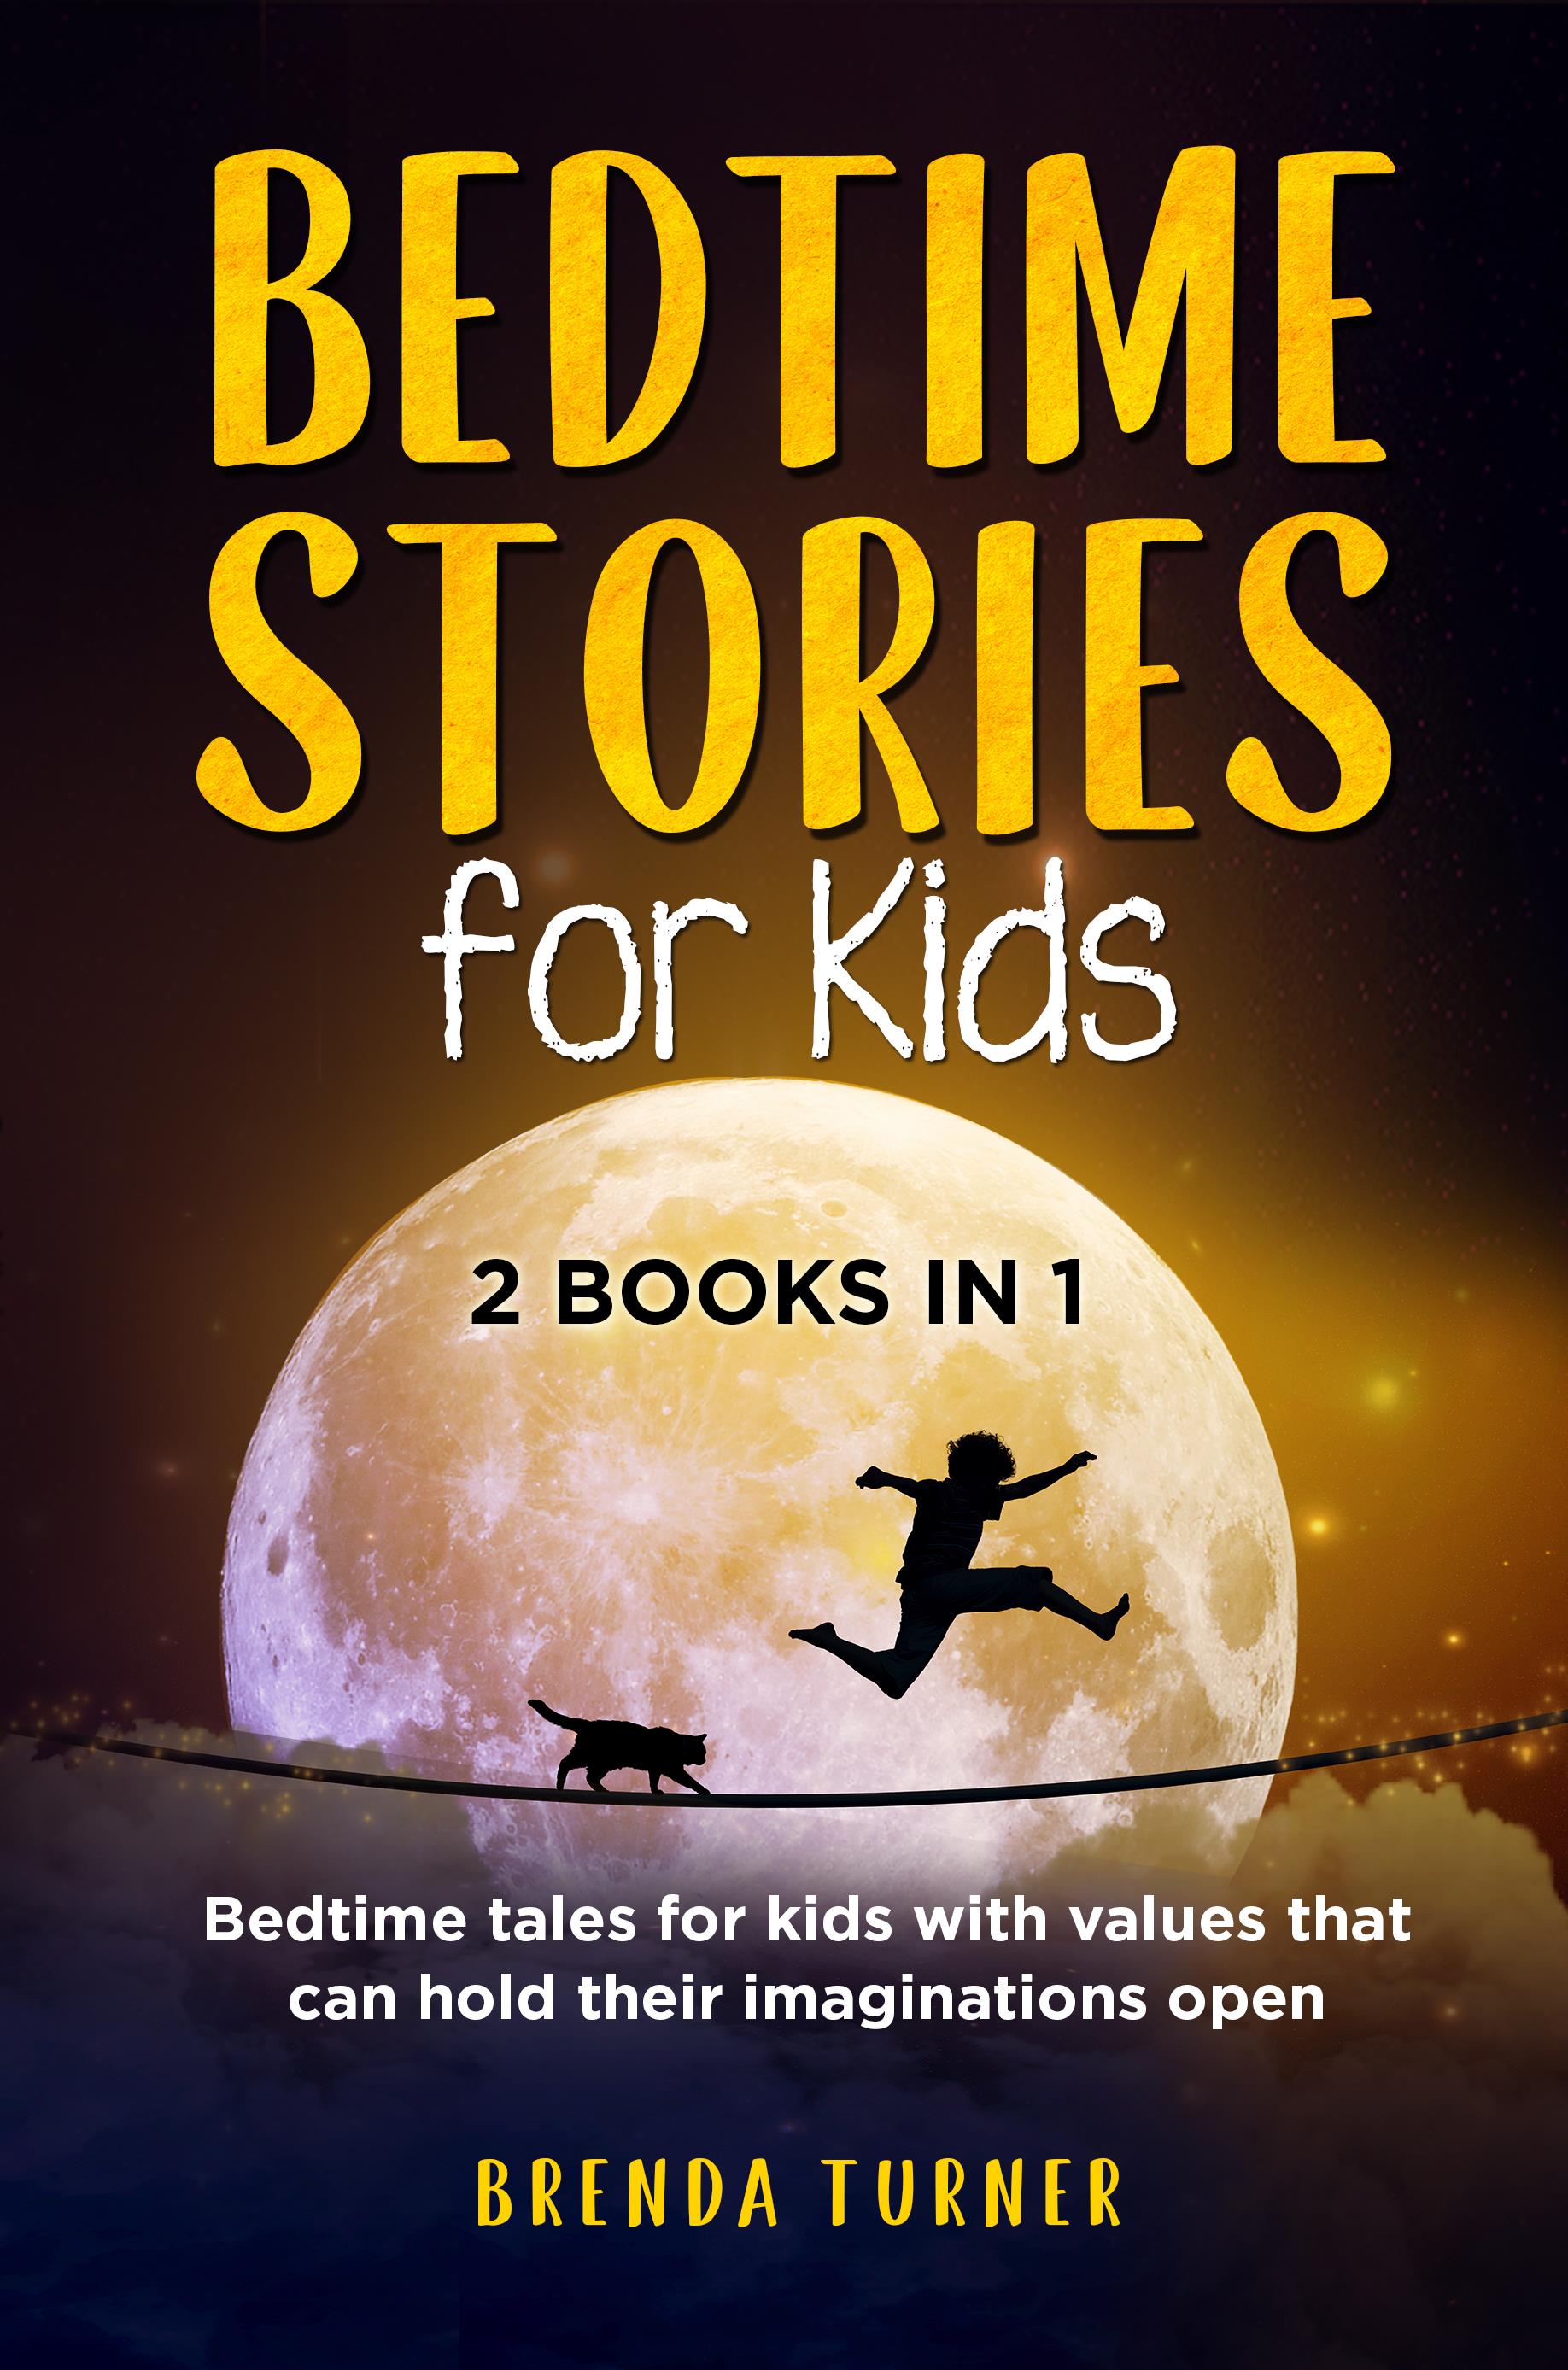 Bedtime Stories for Kids (2 Books in 1). Bedtime tales for kids with values that can hold their imaginations open.